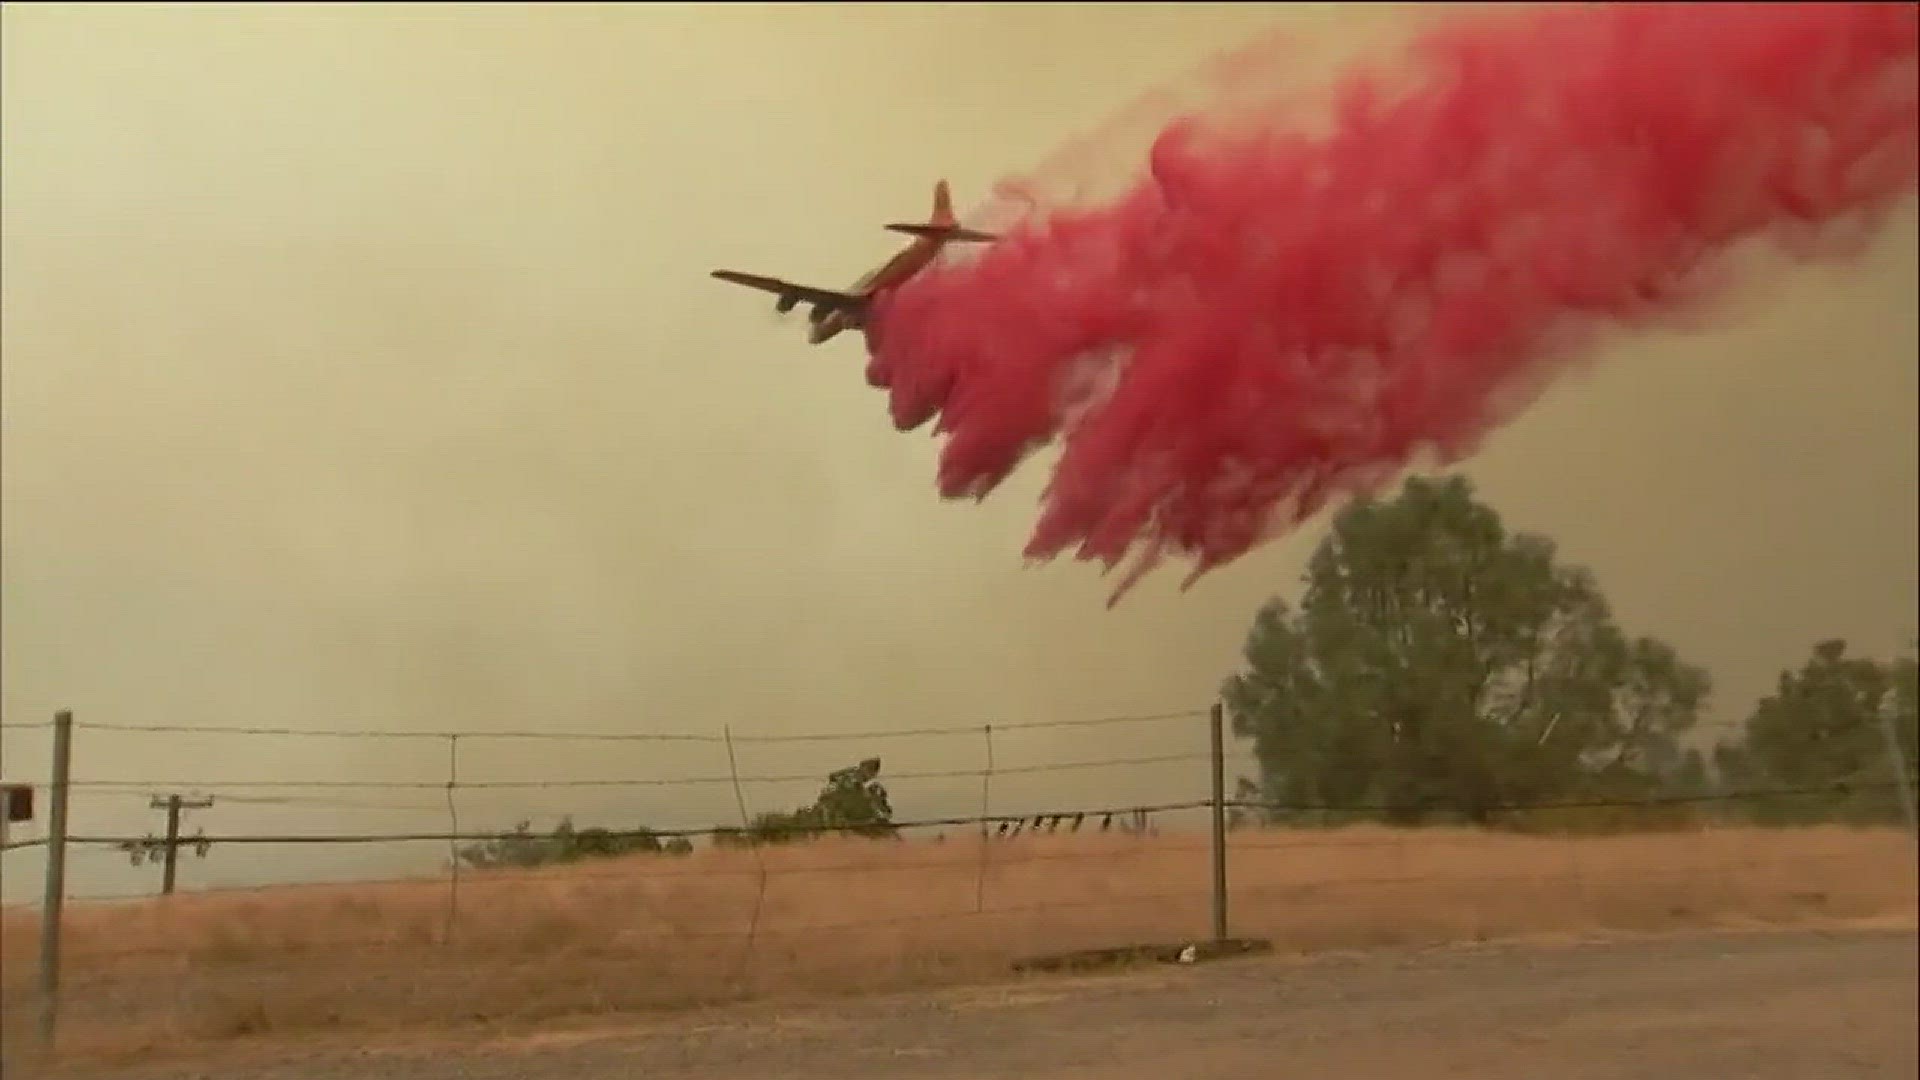 Mariposa evacuated as wild fire grows. It has now burned 25,000 acres and is 5 percent contained.